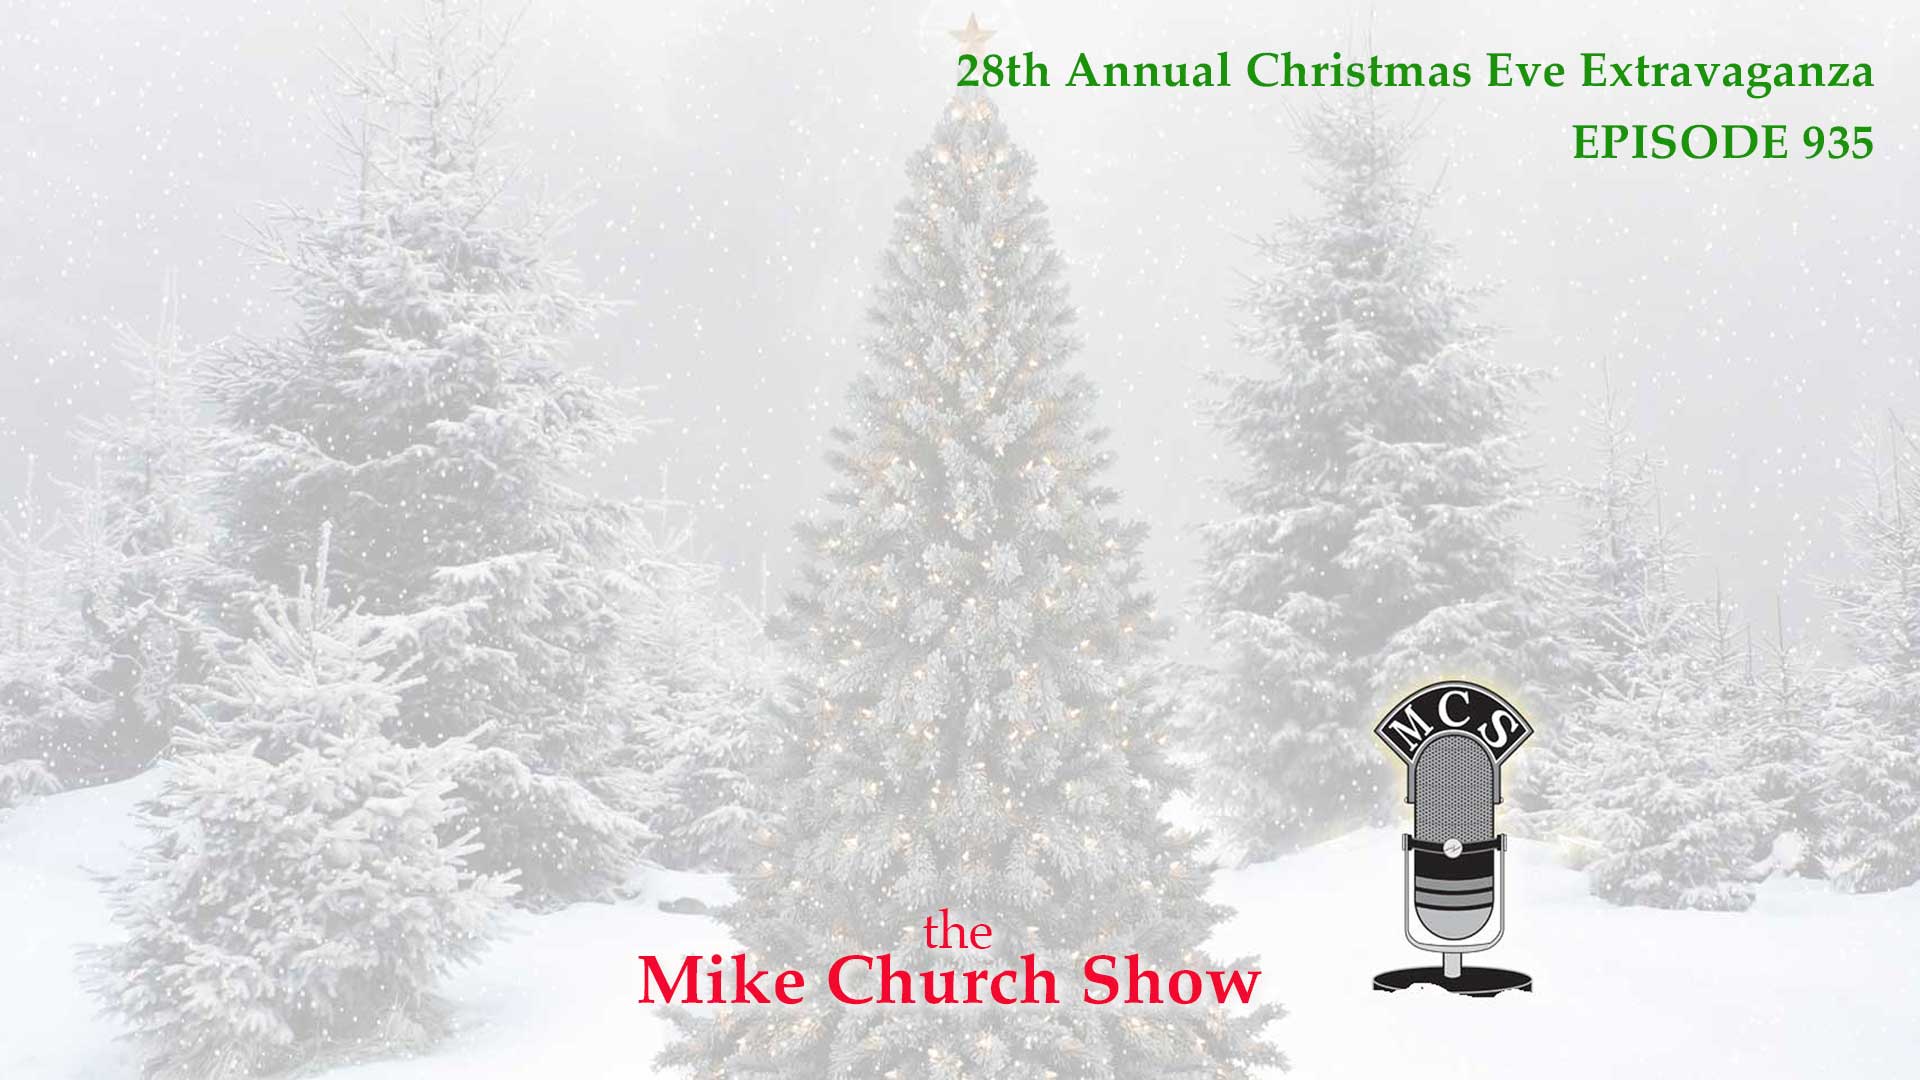 The Mike Church Show 28th Annual Christmas Eve Extravaganza!